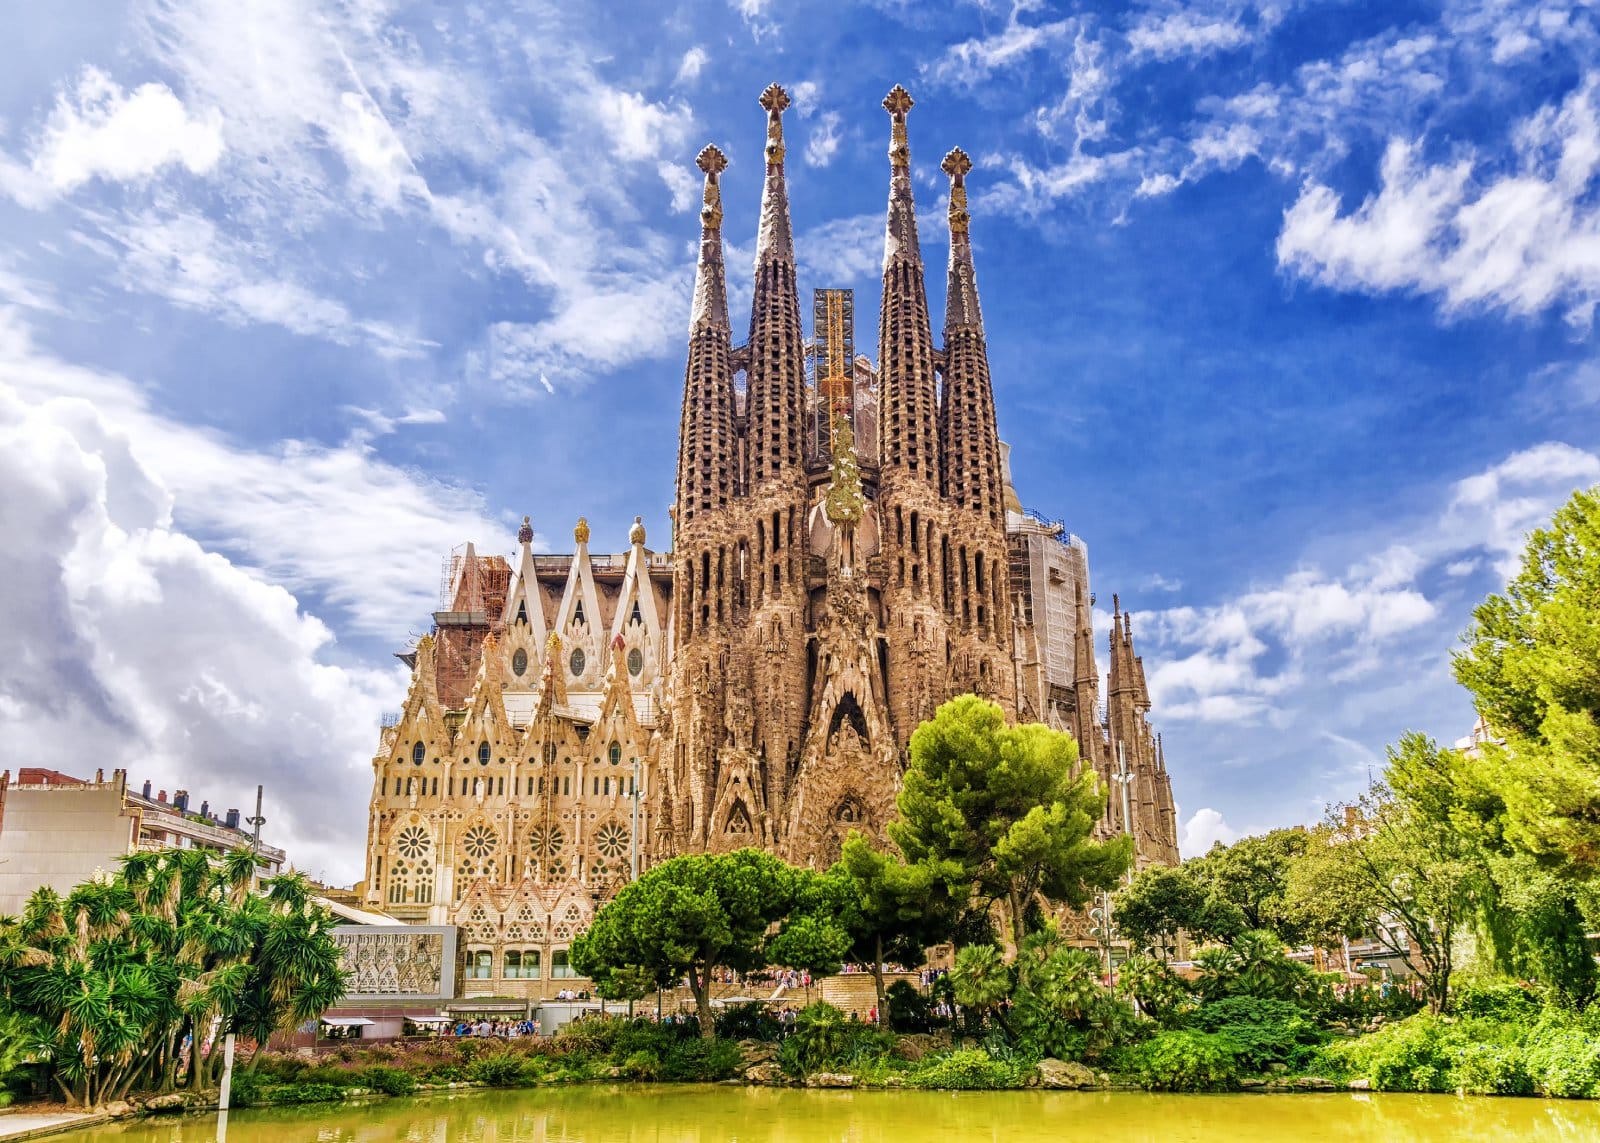 <p>Barcelona is a city of Gaudí’s artistic masterpieces, Gothic architecture, and lively beaches along the Mediterranean coast.</p>